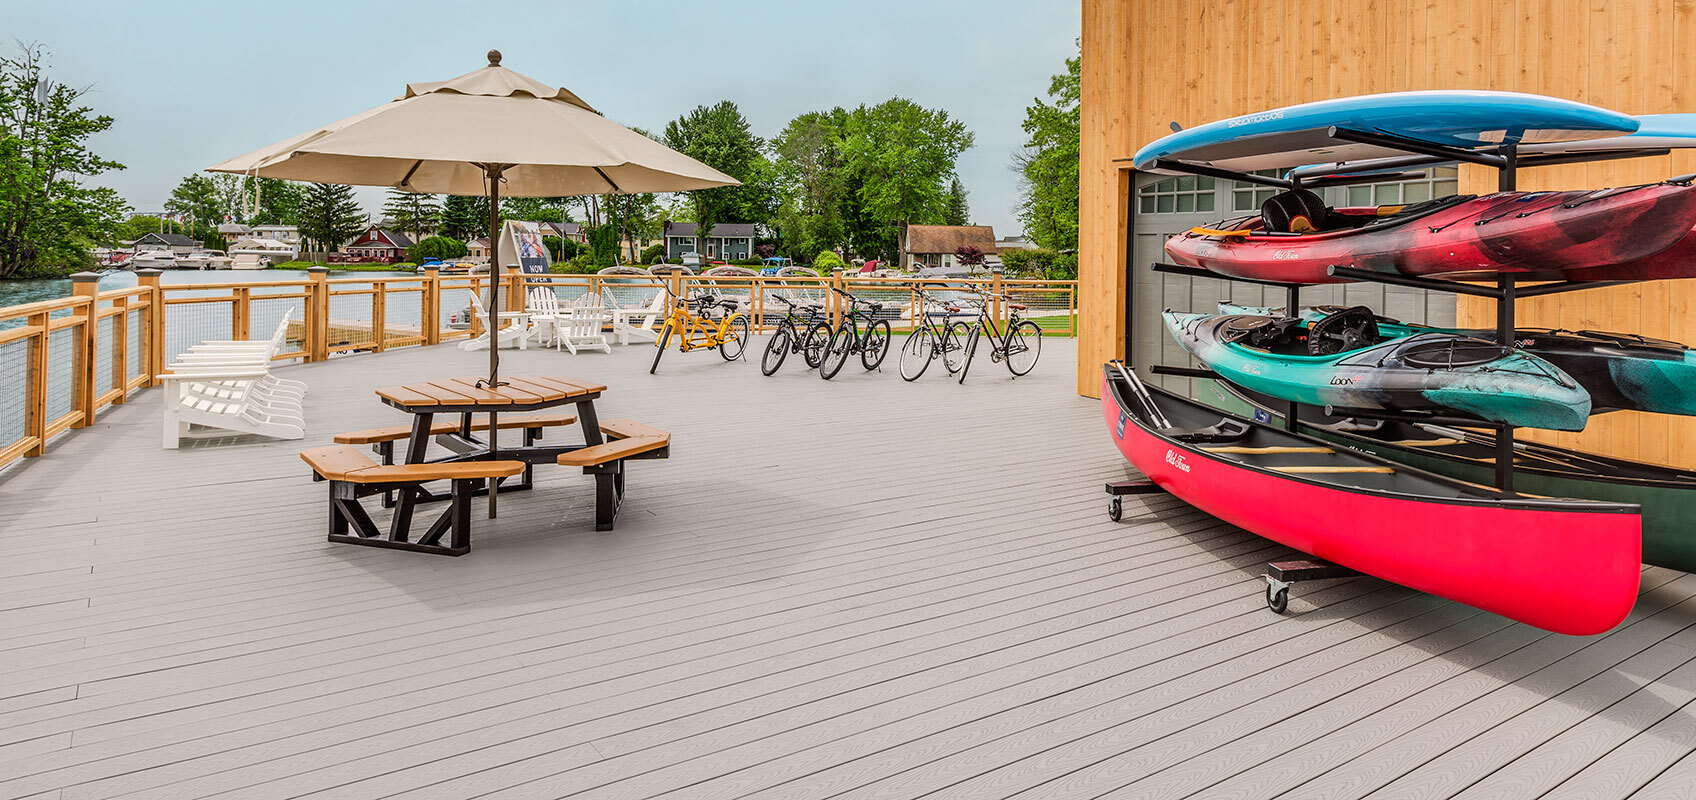 The deck at Sylvan Beach Supply Co with kayak, canoe, bicycle rentals